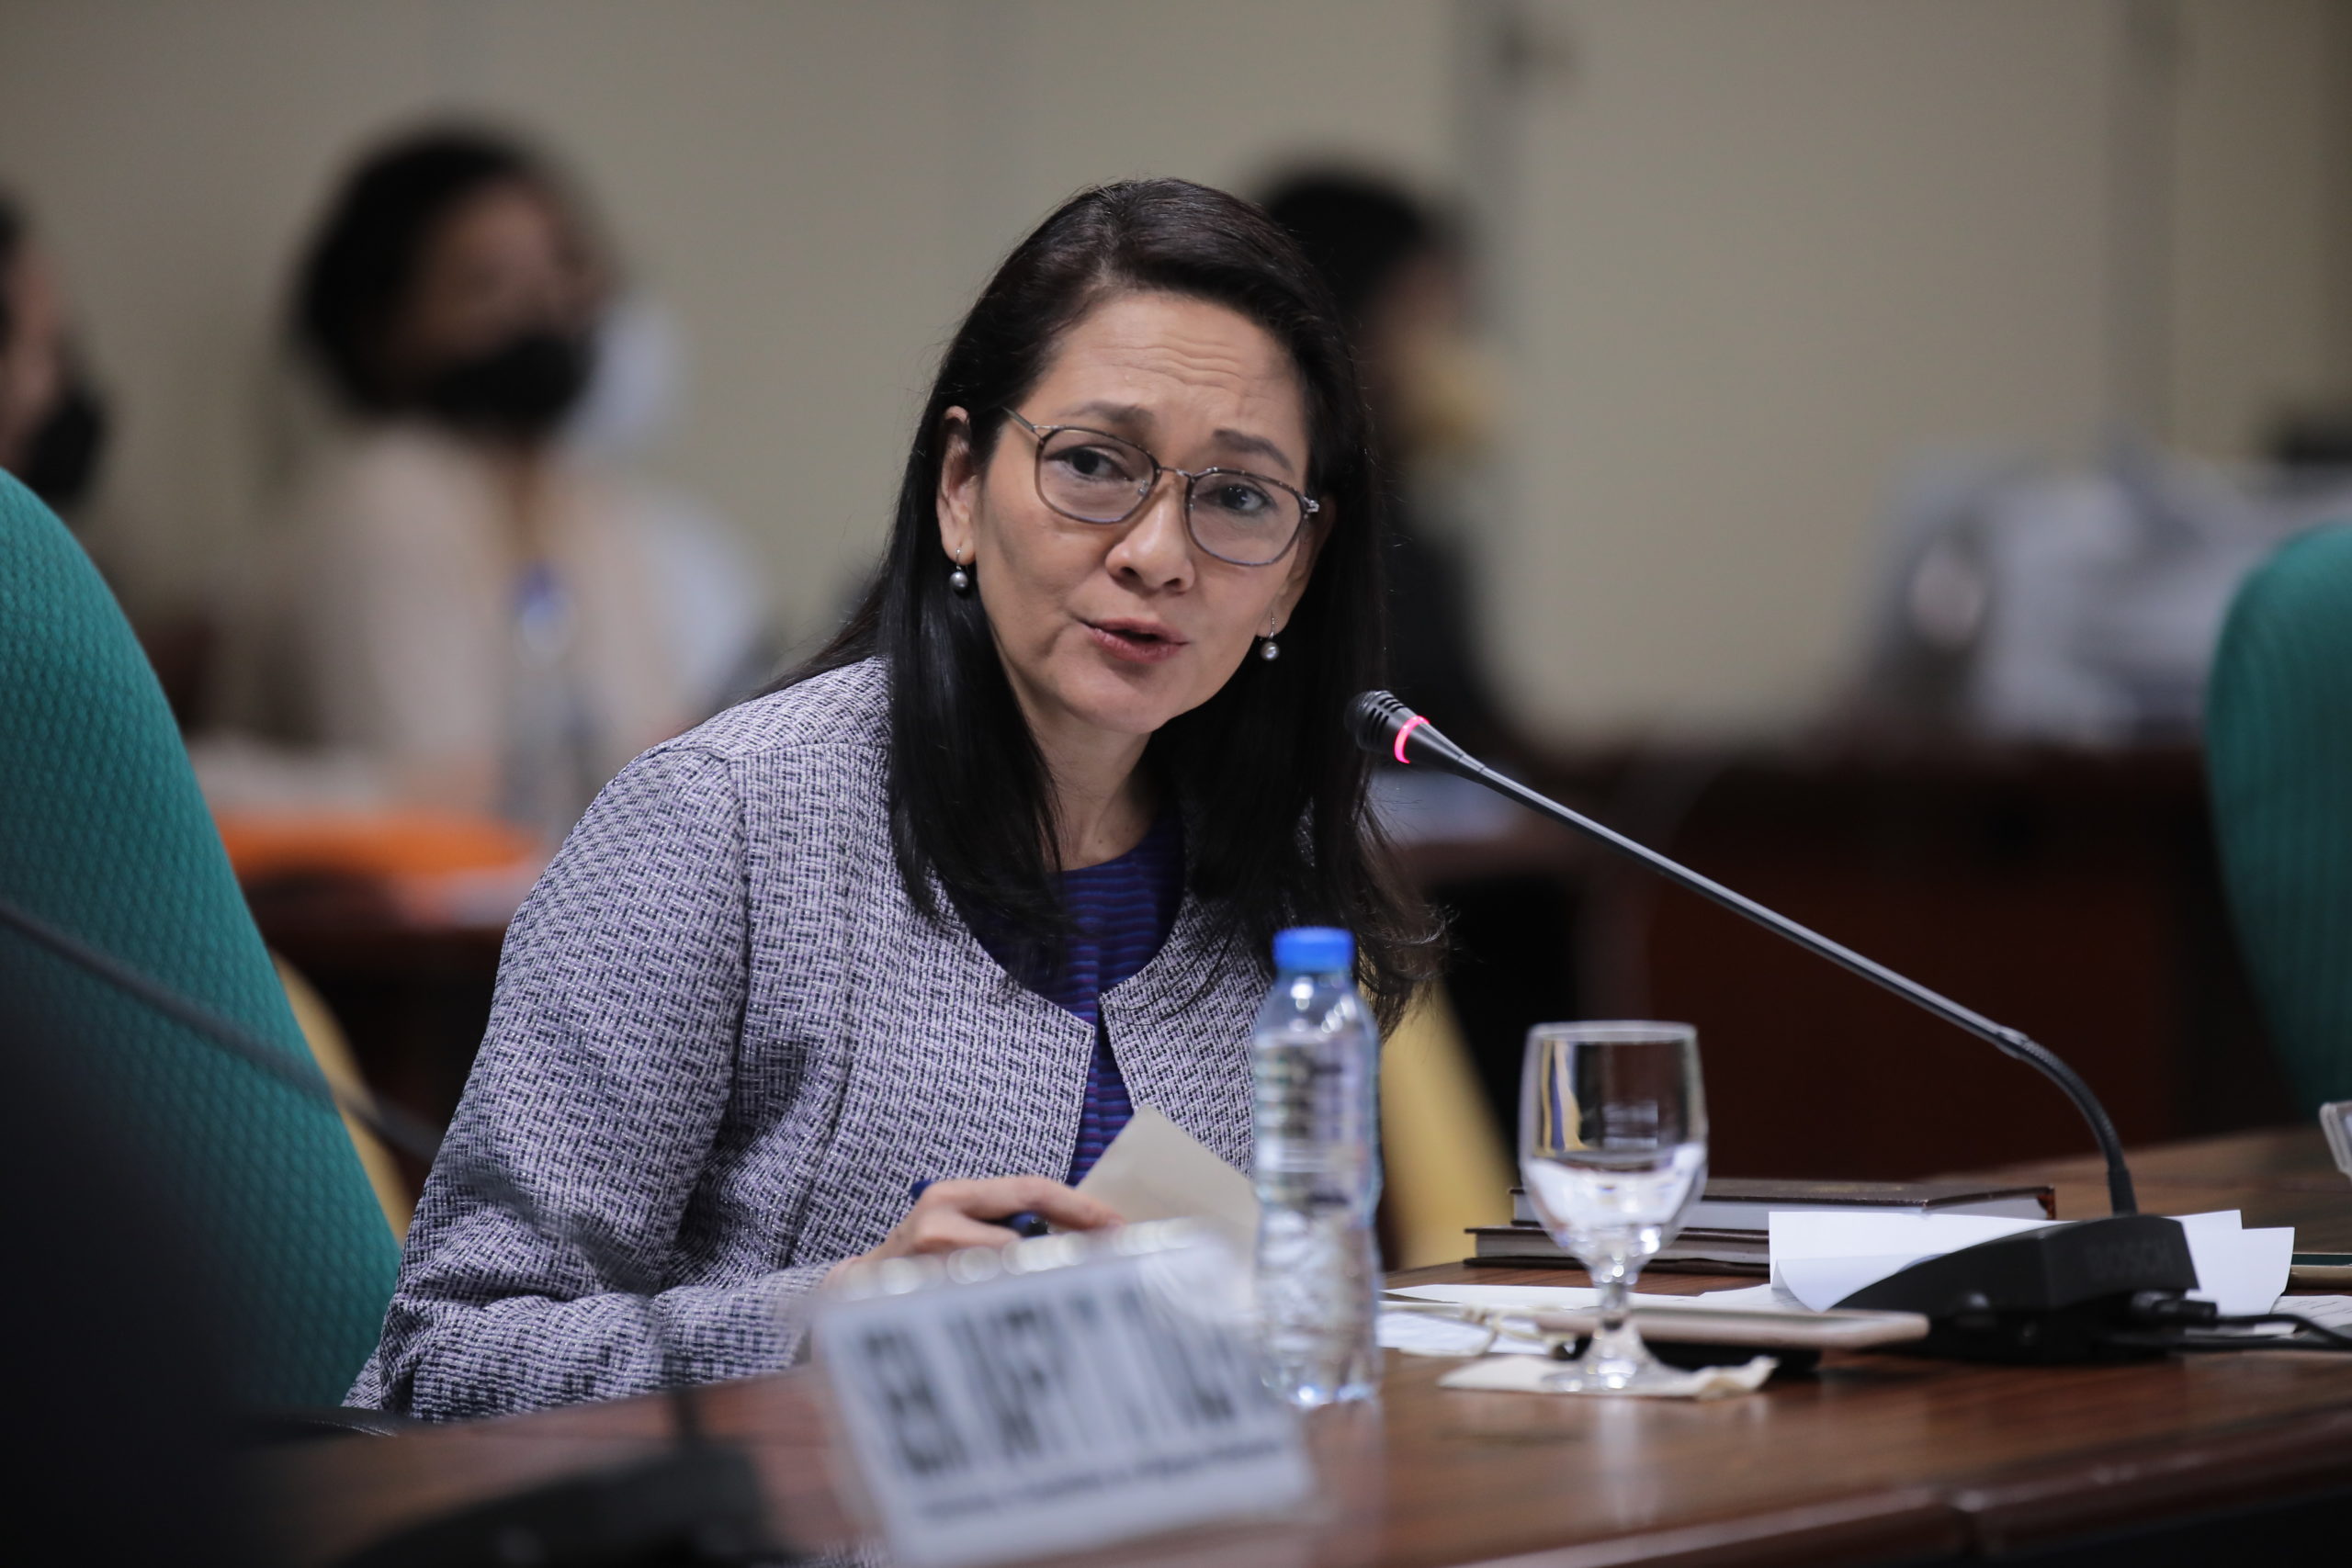 Sen. Risa Hontiveros on Friday said President Marcos should make good on his pronouncement that the Philippines will consider other ways to search for oil and gas in the West Philippine Sea after the President said talks with China have reached a stalemate.